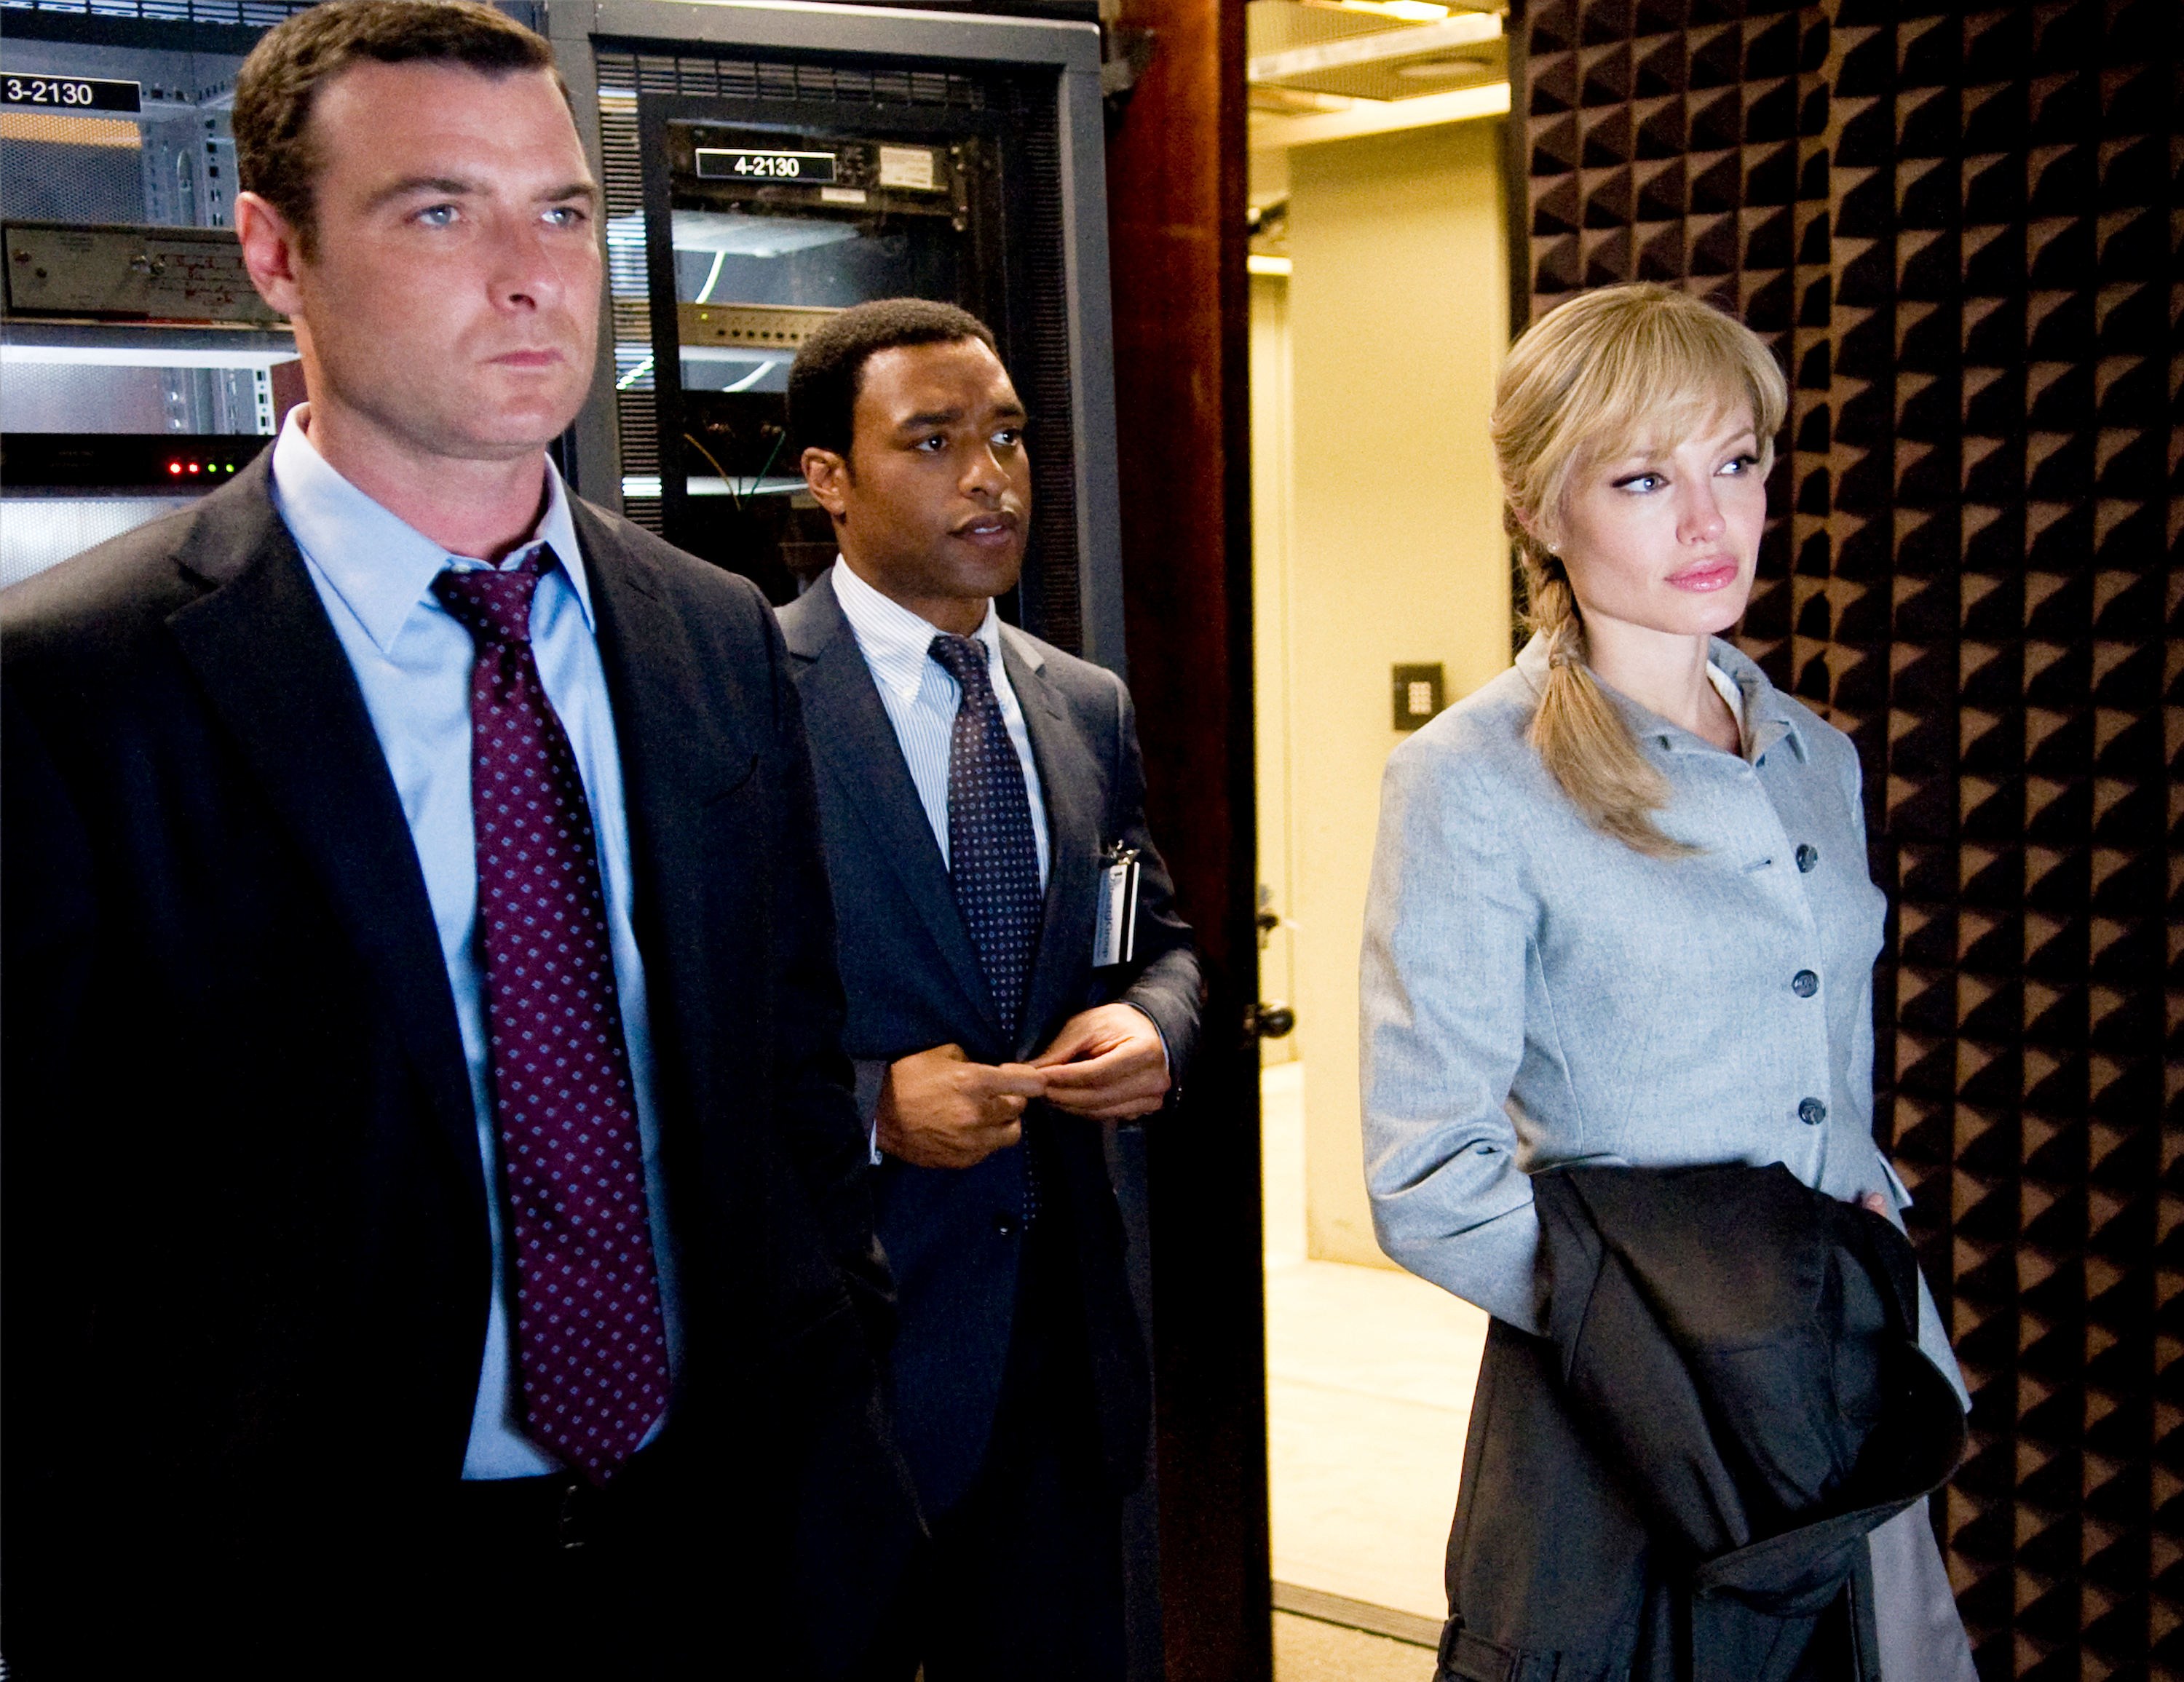 Liev Schreiber, Chiwetel Ejiofor and Angelina Jolie in Columbia Pictures' Salt (2010)